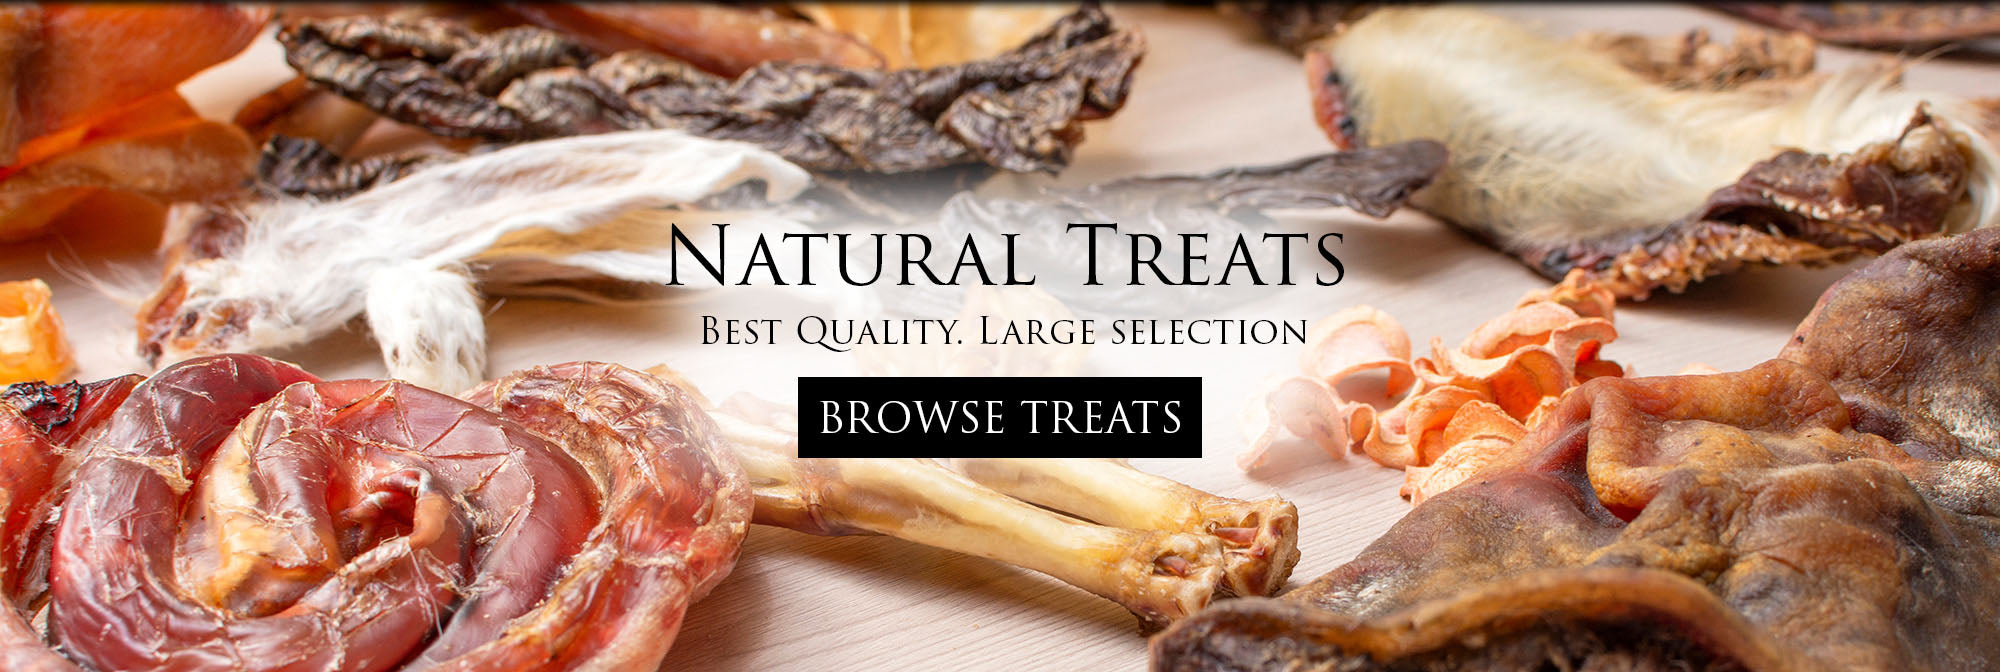 Natural Treats For Dogs